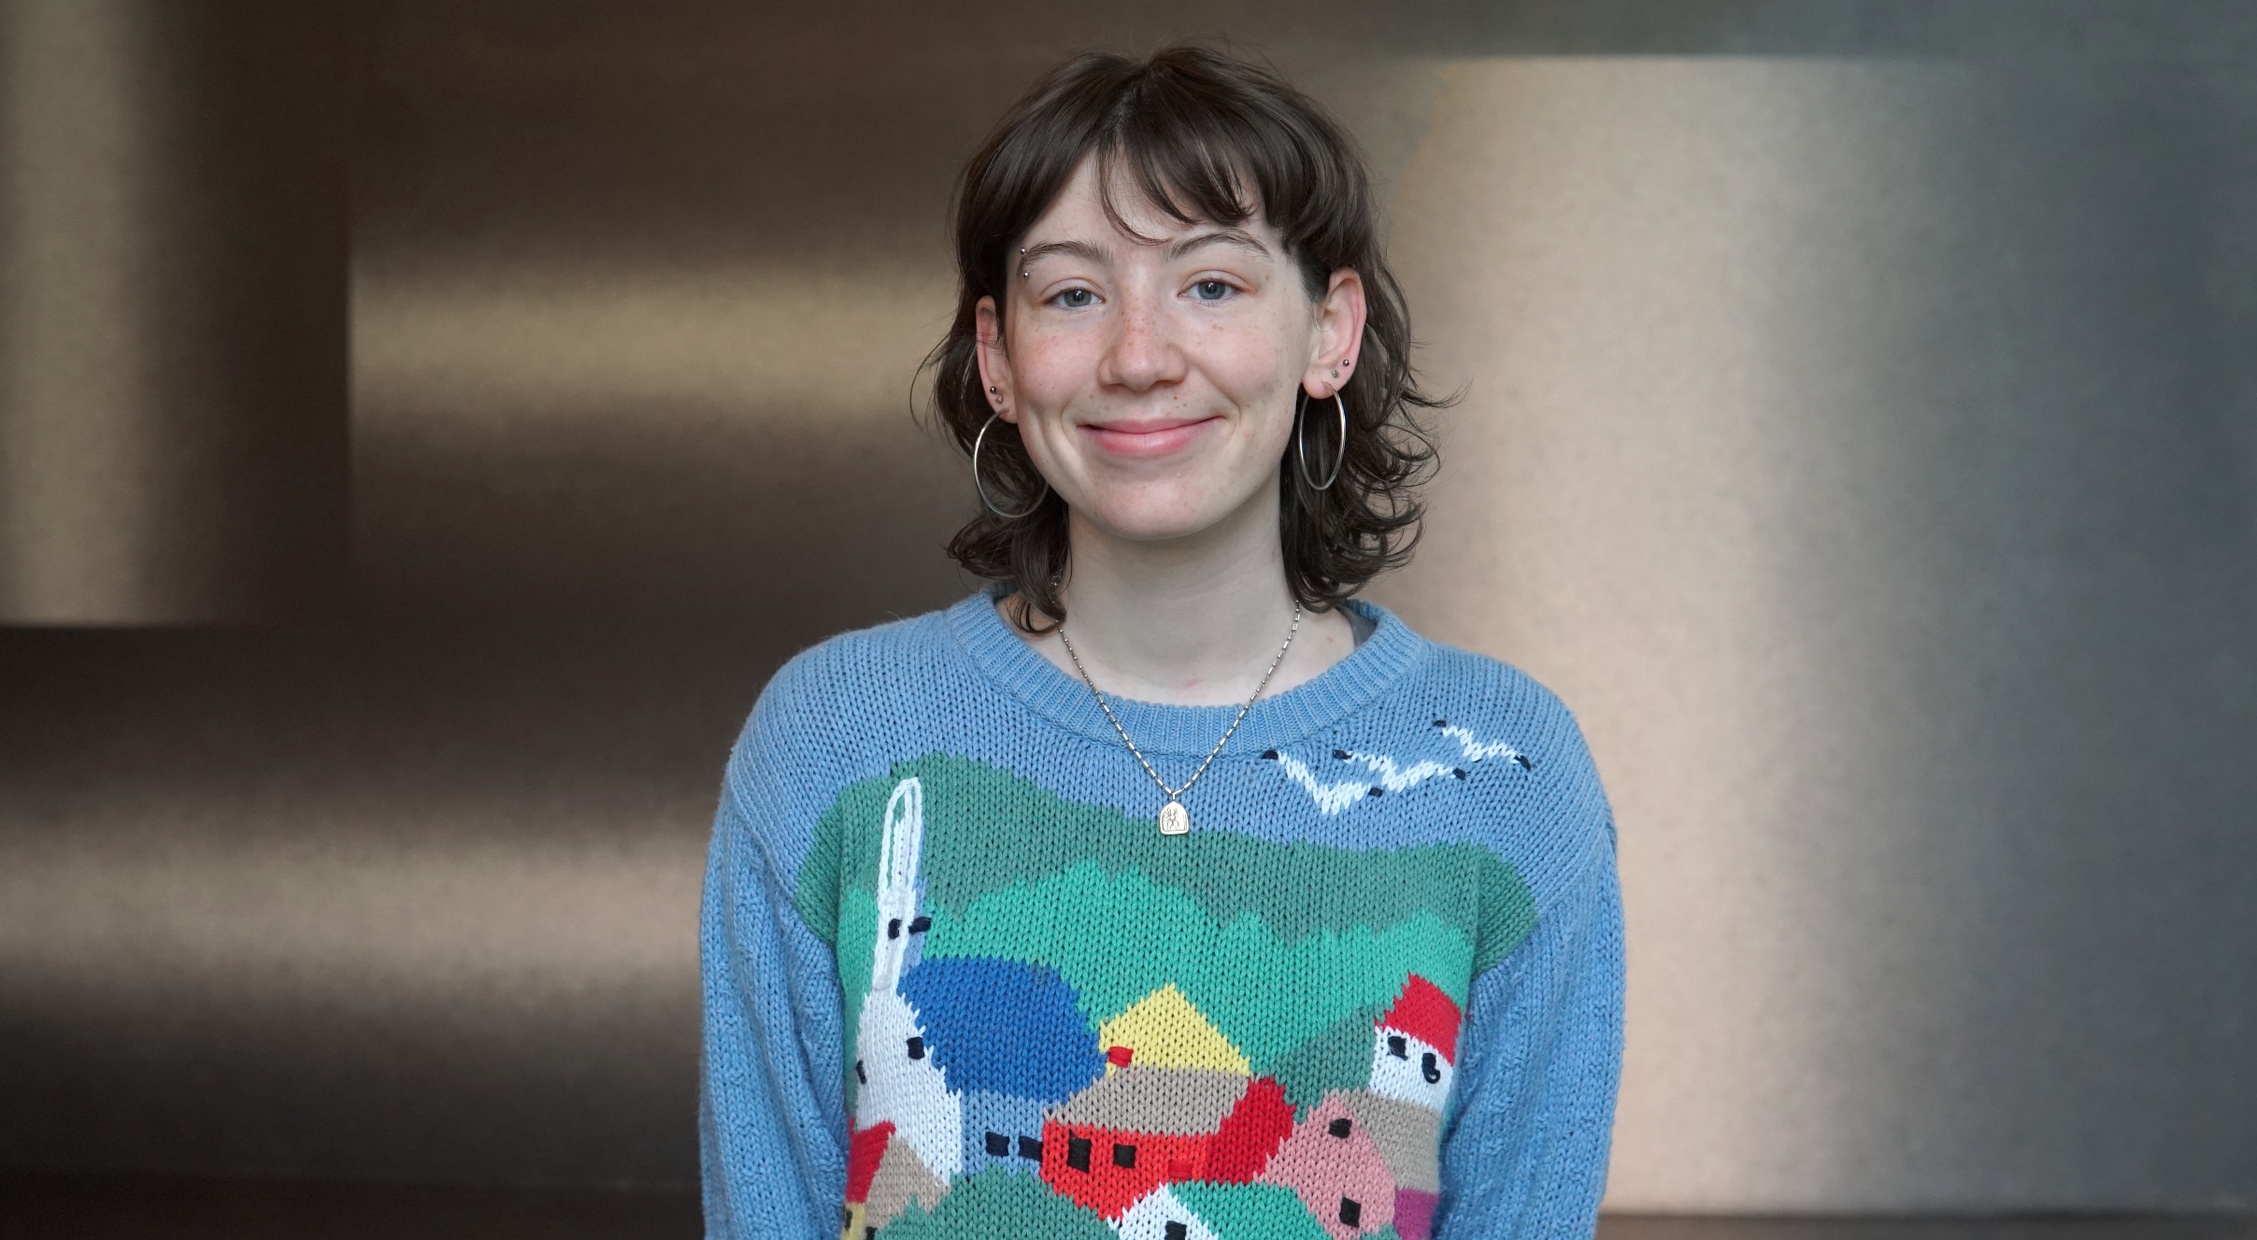 A young light-skinned woman with brown hair smiles at us and wears a light blue, red, and green sweater.